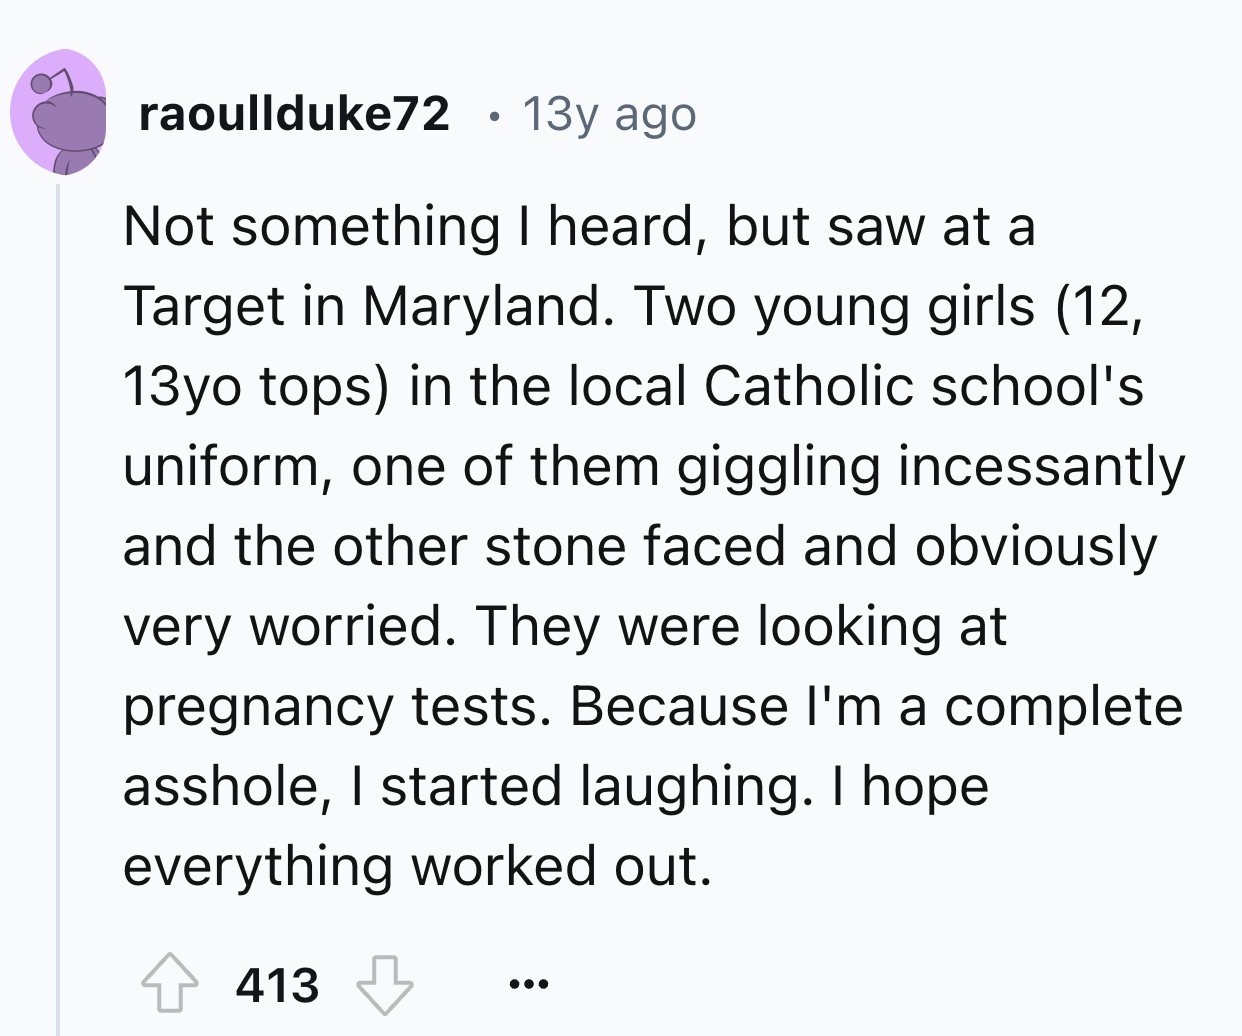 number - raoullduke72 13y ago . Not something I heard, but saw at a Target in Maryland. Two young girls 12, 13yo tops in the local Catholic school's uniform, one of them giggling incessantly and the other stone faced and obviously very worried. They were 